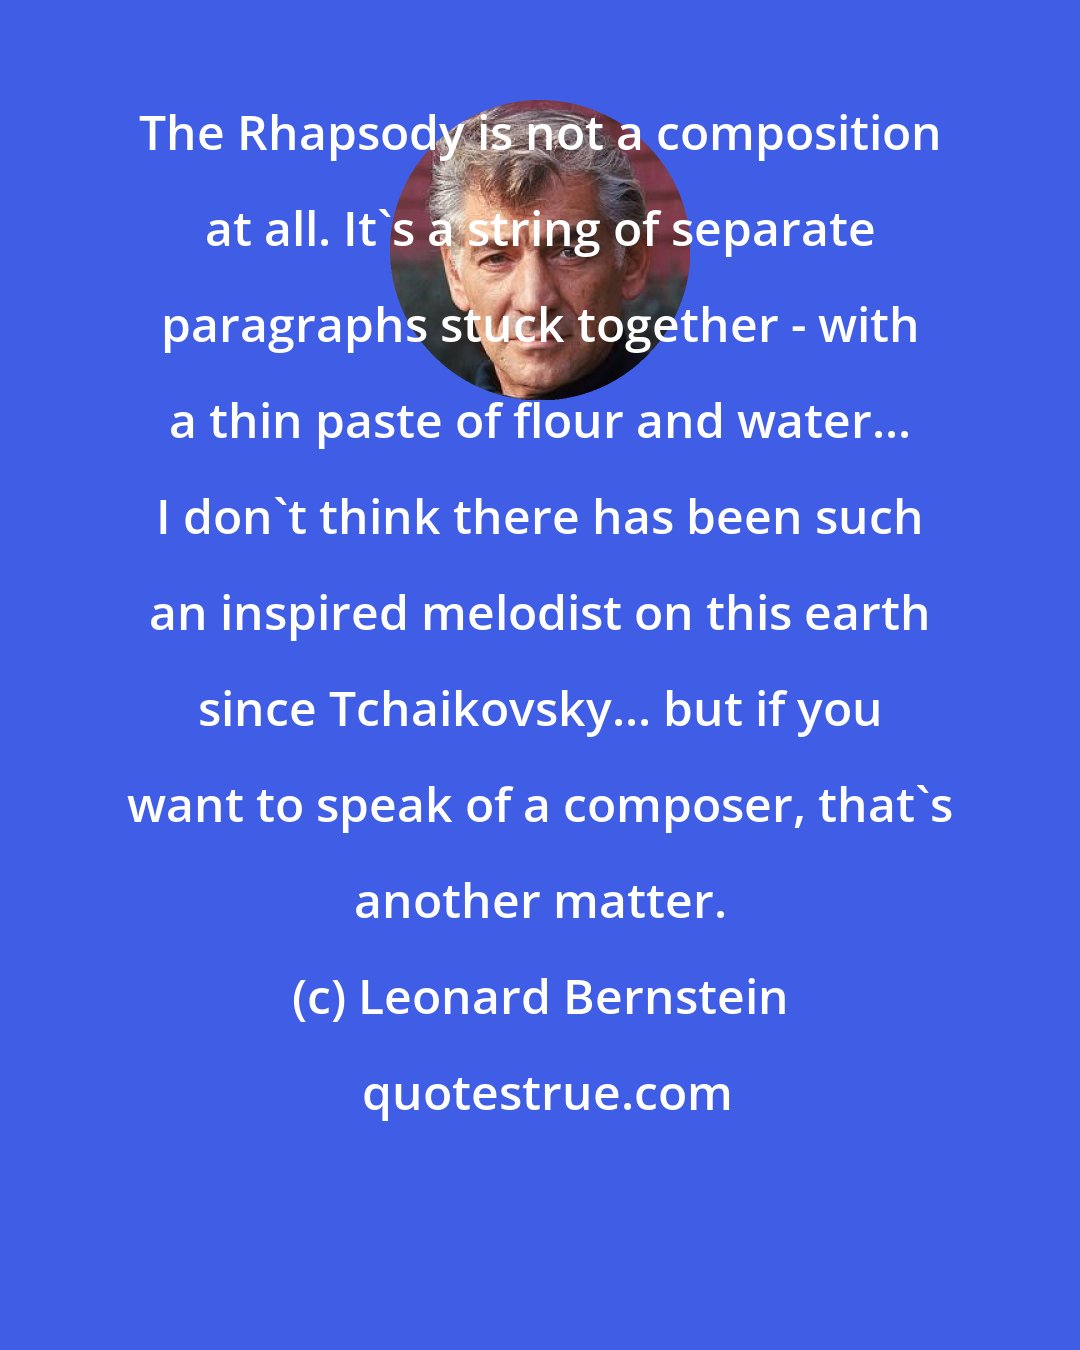 Leonard Bernstein: The Rhapsody is not a composition at all. It's a string of separate paragraphs stuck together - with a thin paste of flour and water... I don't think there has been such an inspired melodist on this earth since Tchaikovsky... but if you want to speak of a composer, that's another matter.